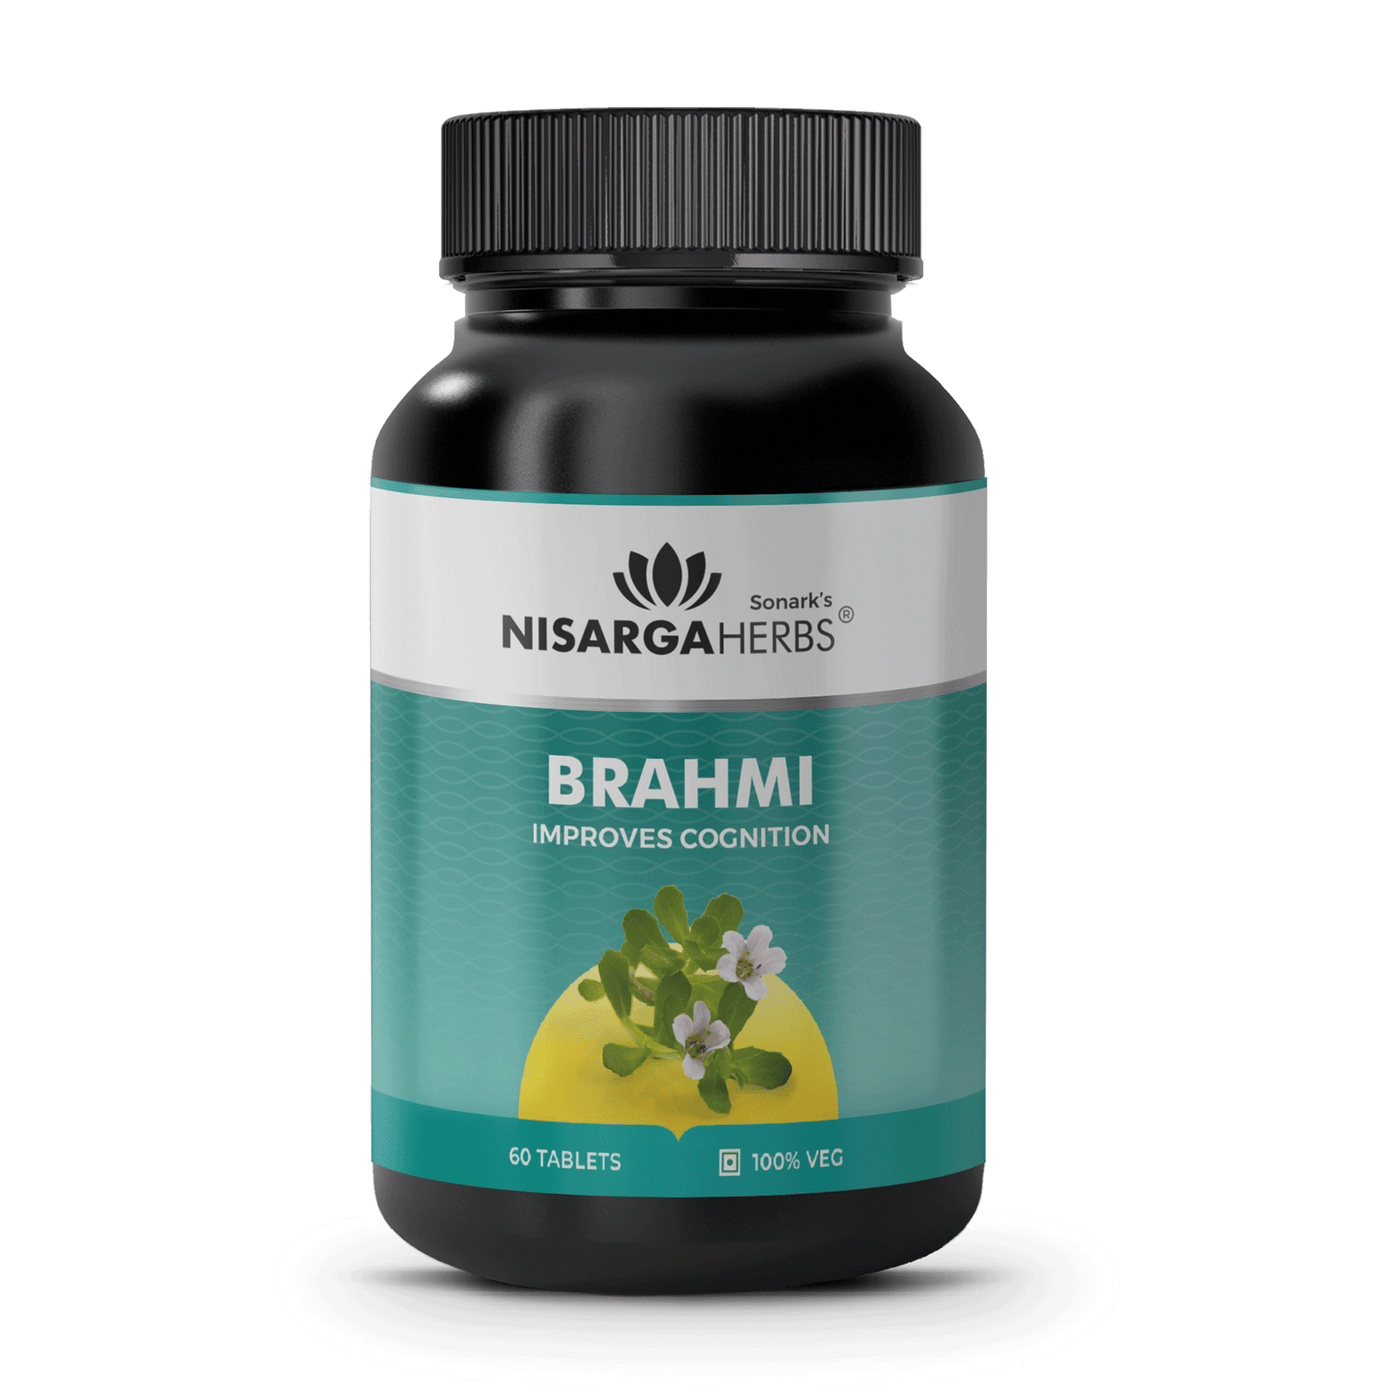 ayurvedic medicine brahmi tablet for Reduces stress, Boosts brain function, Treats insomnia, Reduces blood pressure, Promotes healthy hair, Helps manage diabetes, Promotes wound healing, Provides fever and asthma relief.